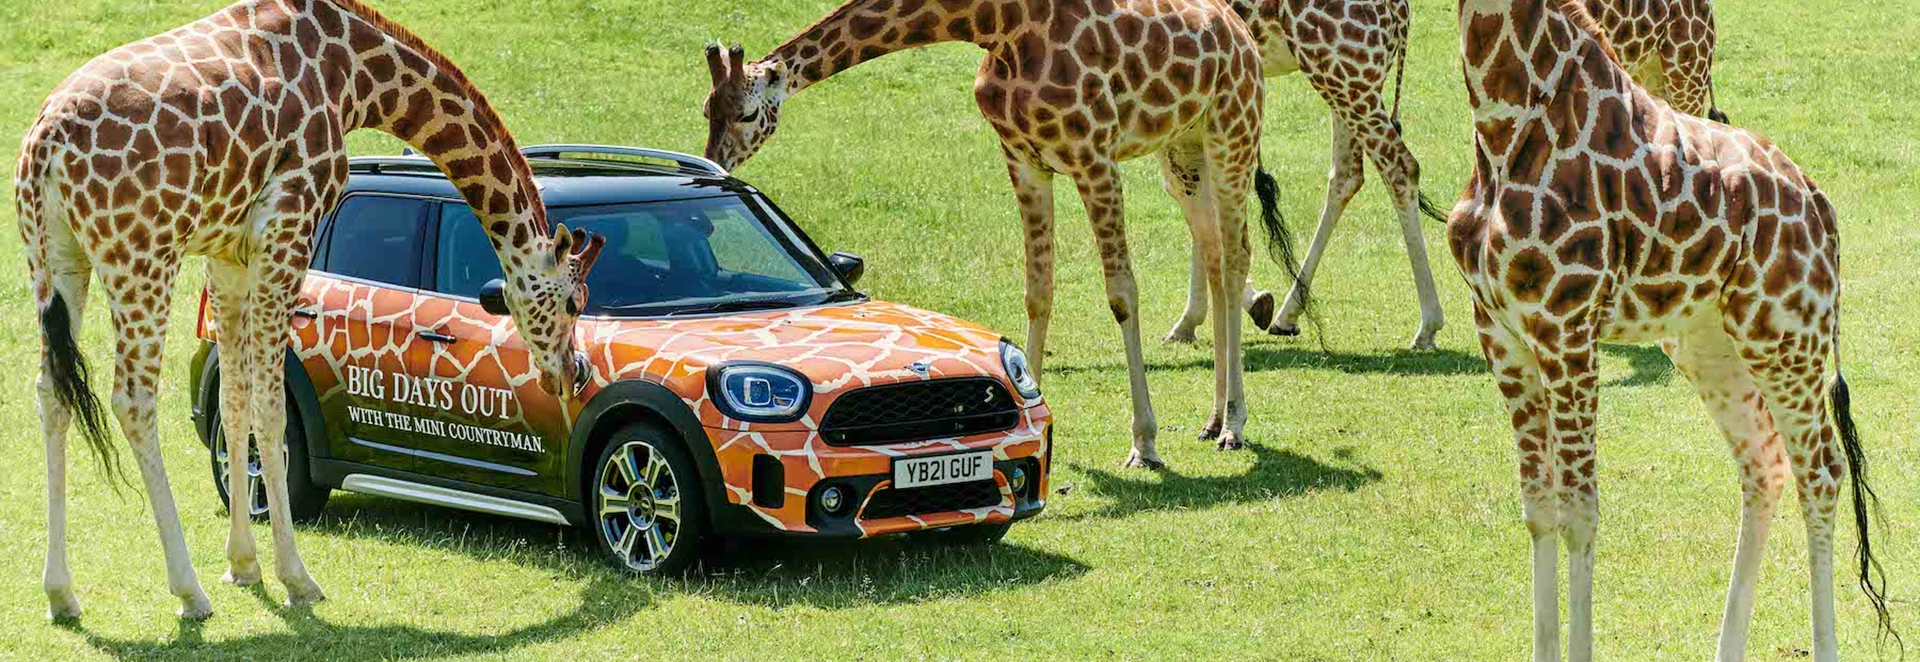 Mini joins forces with Longleat safari park 